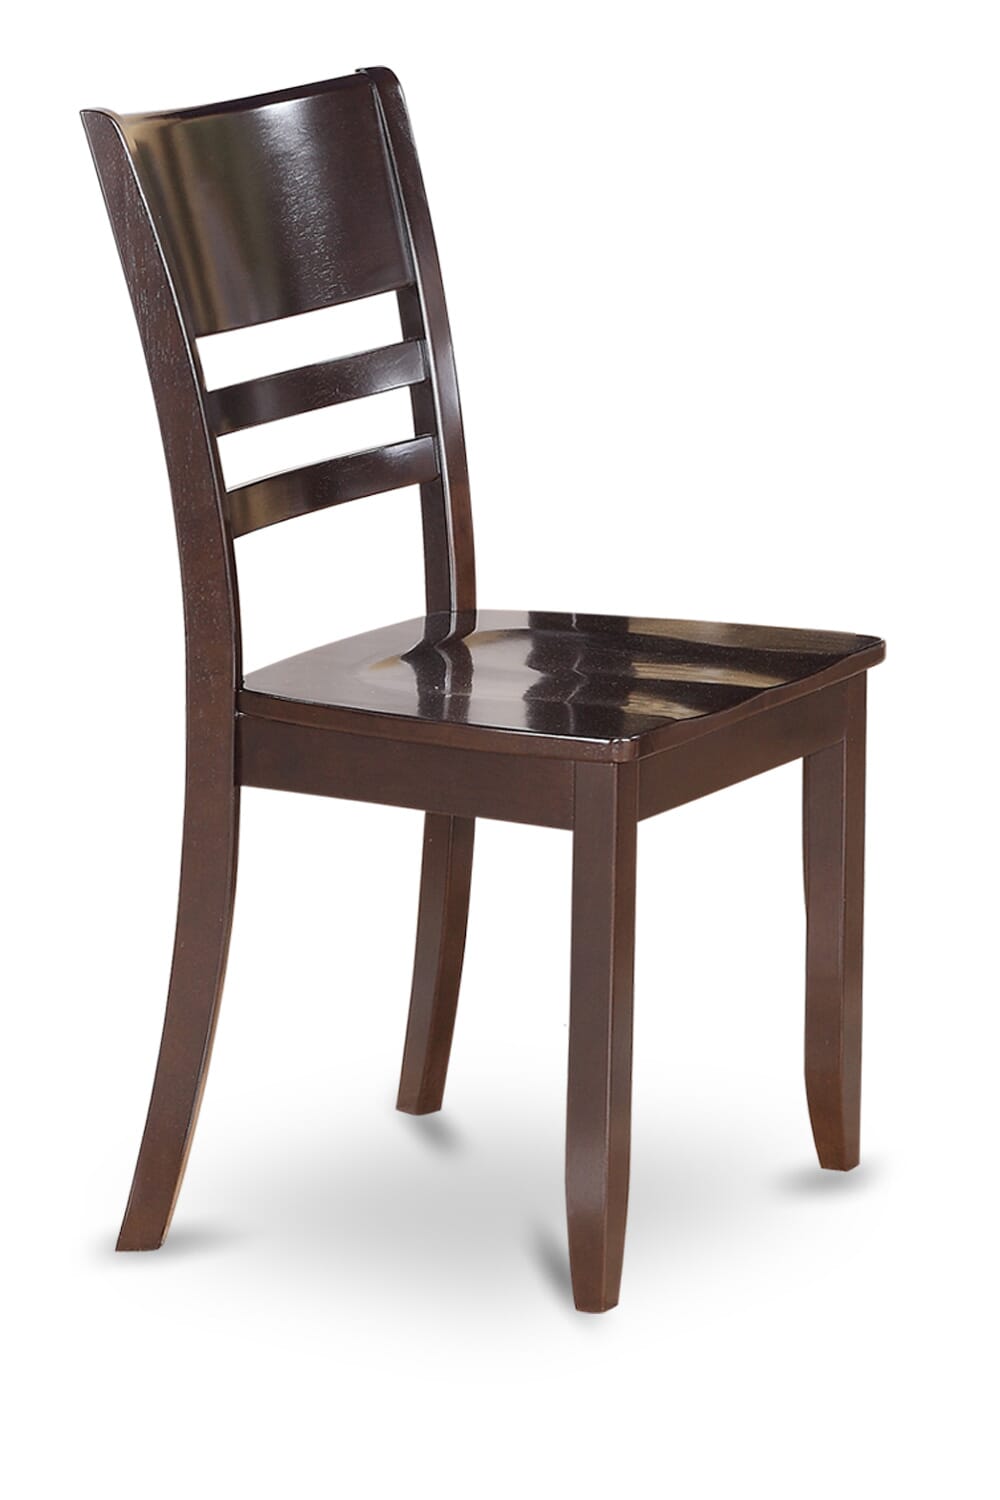 East West Furniture BOLY3-CAP-W 3 Piece Dining Room Table Set Contains a Round Wooden Table and 2 Kitchen Dining Chairs, 42x42 Inch, Cappuccino